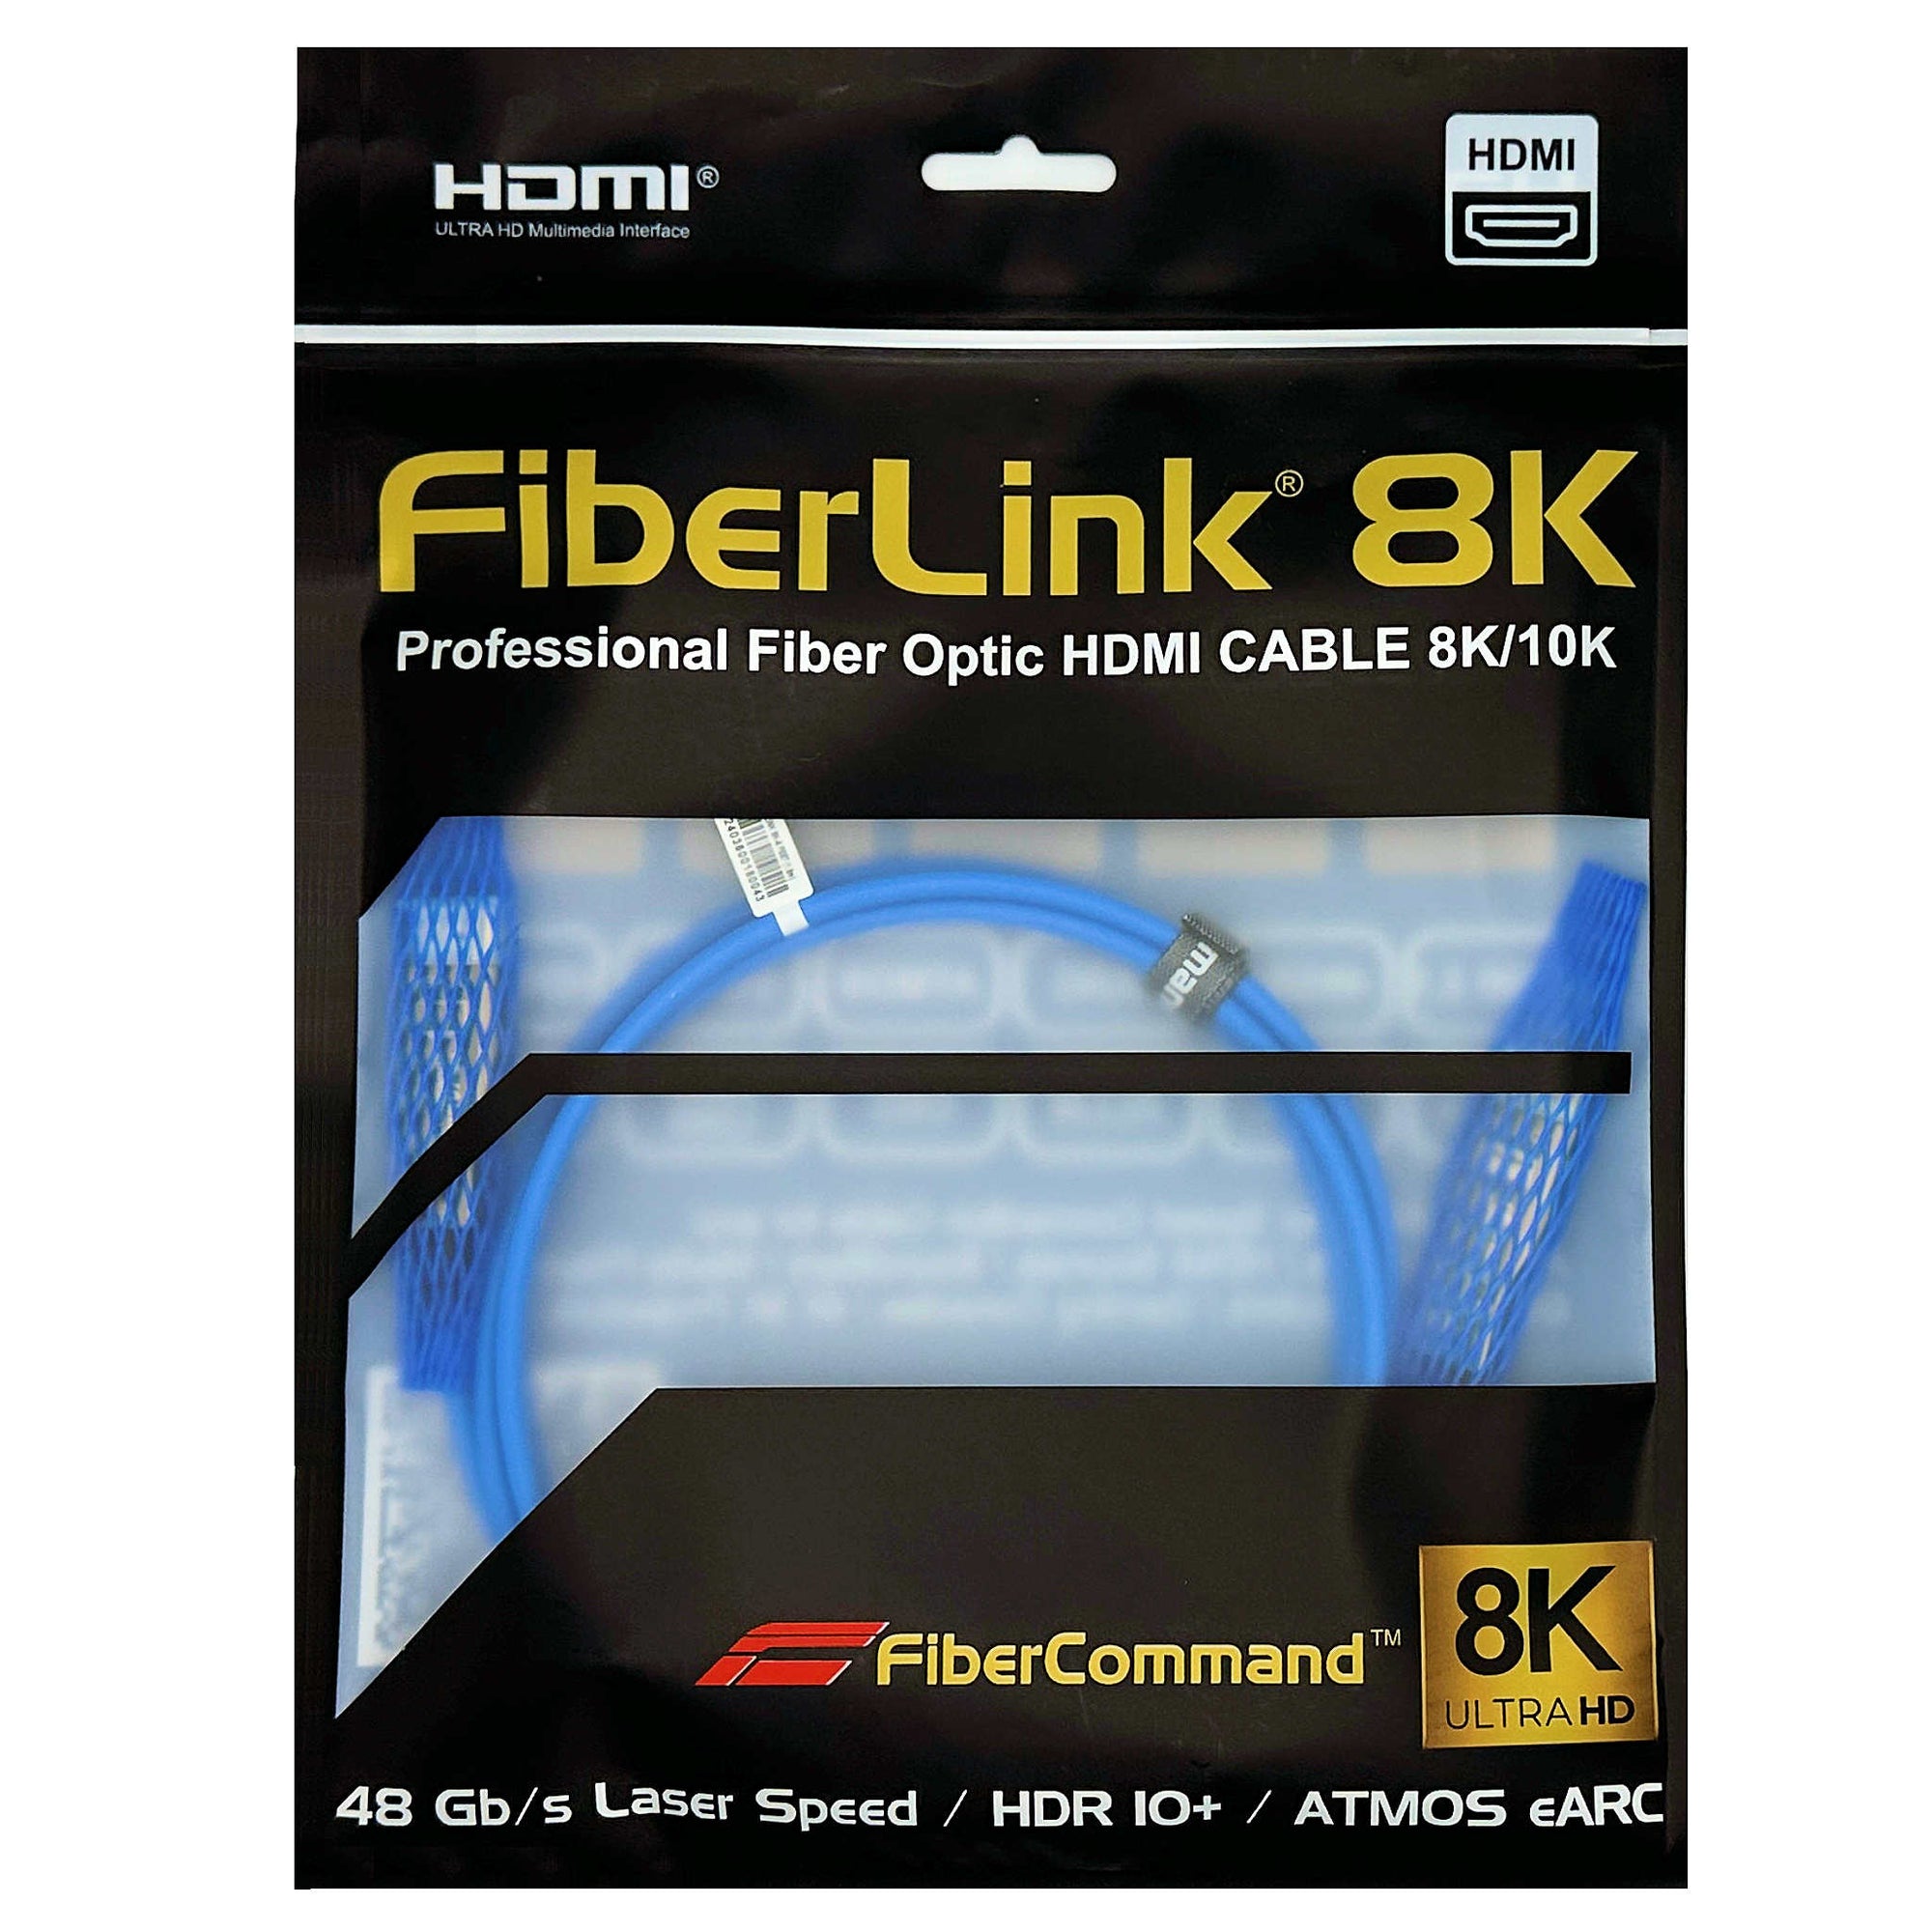 example of fiber optic hdmi 2.1 cable for 4k 8k 10k 48gbps ultra speed connections best for frame smart tv or gaming or earc